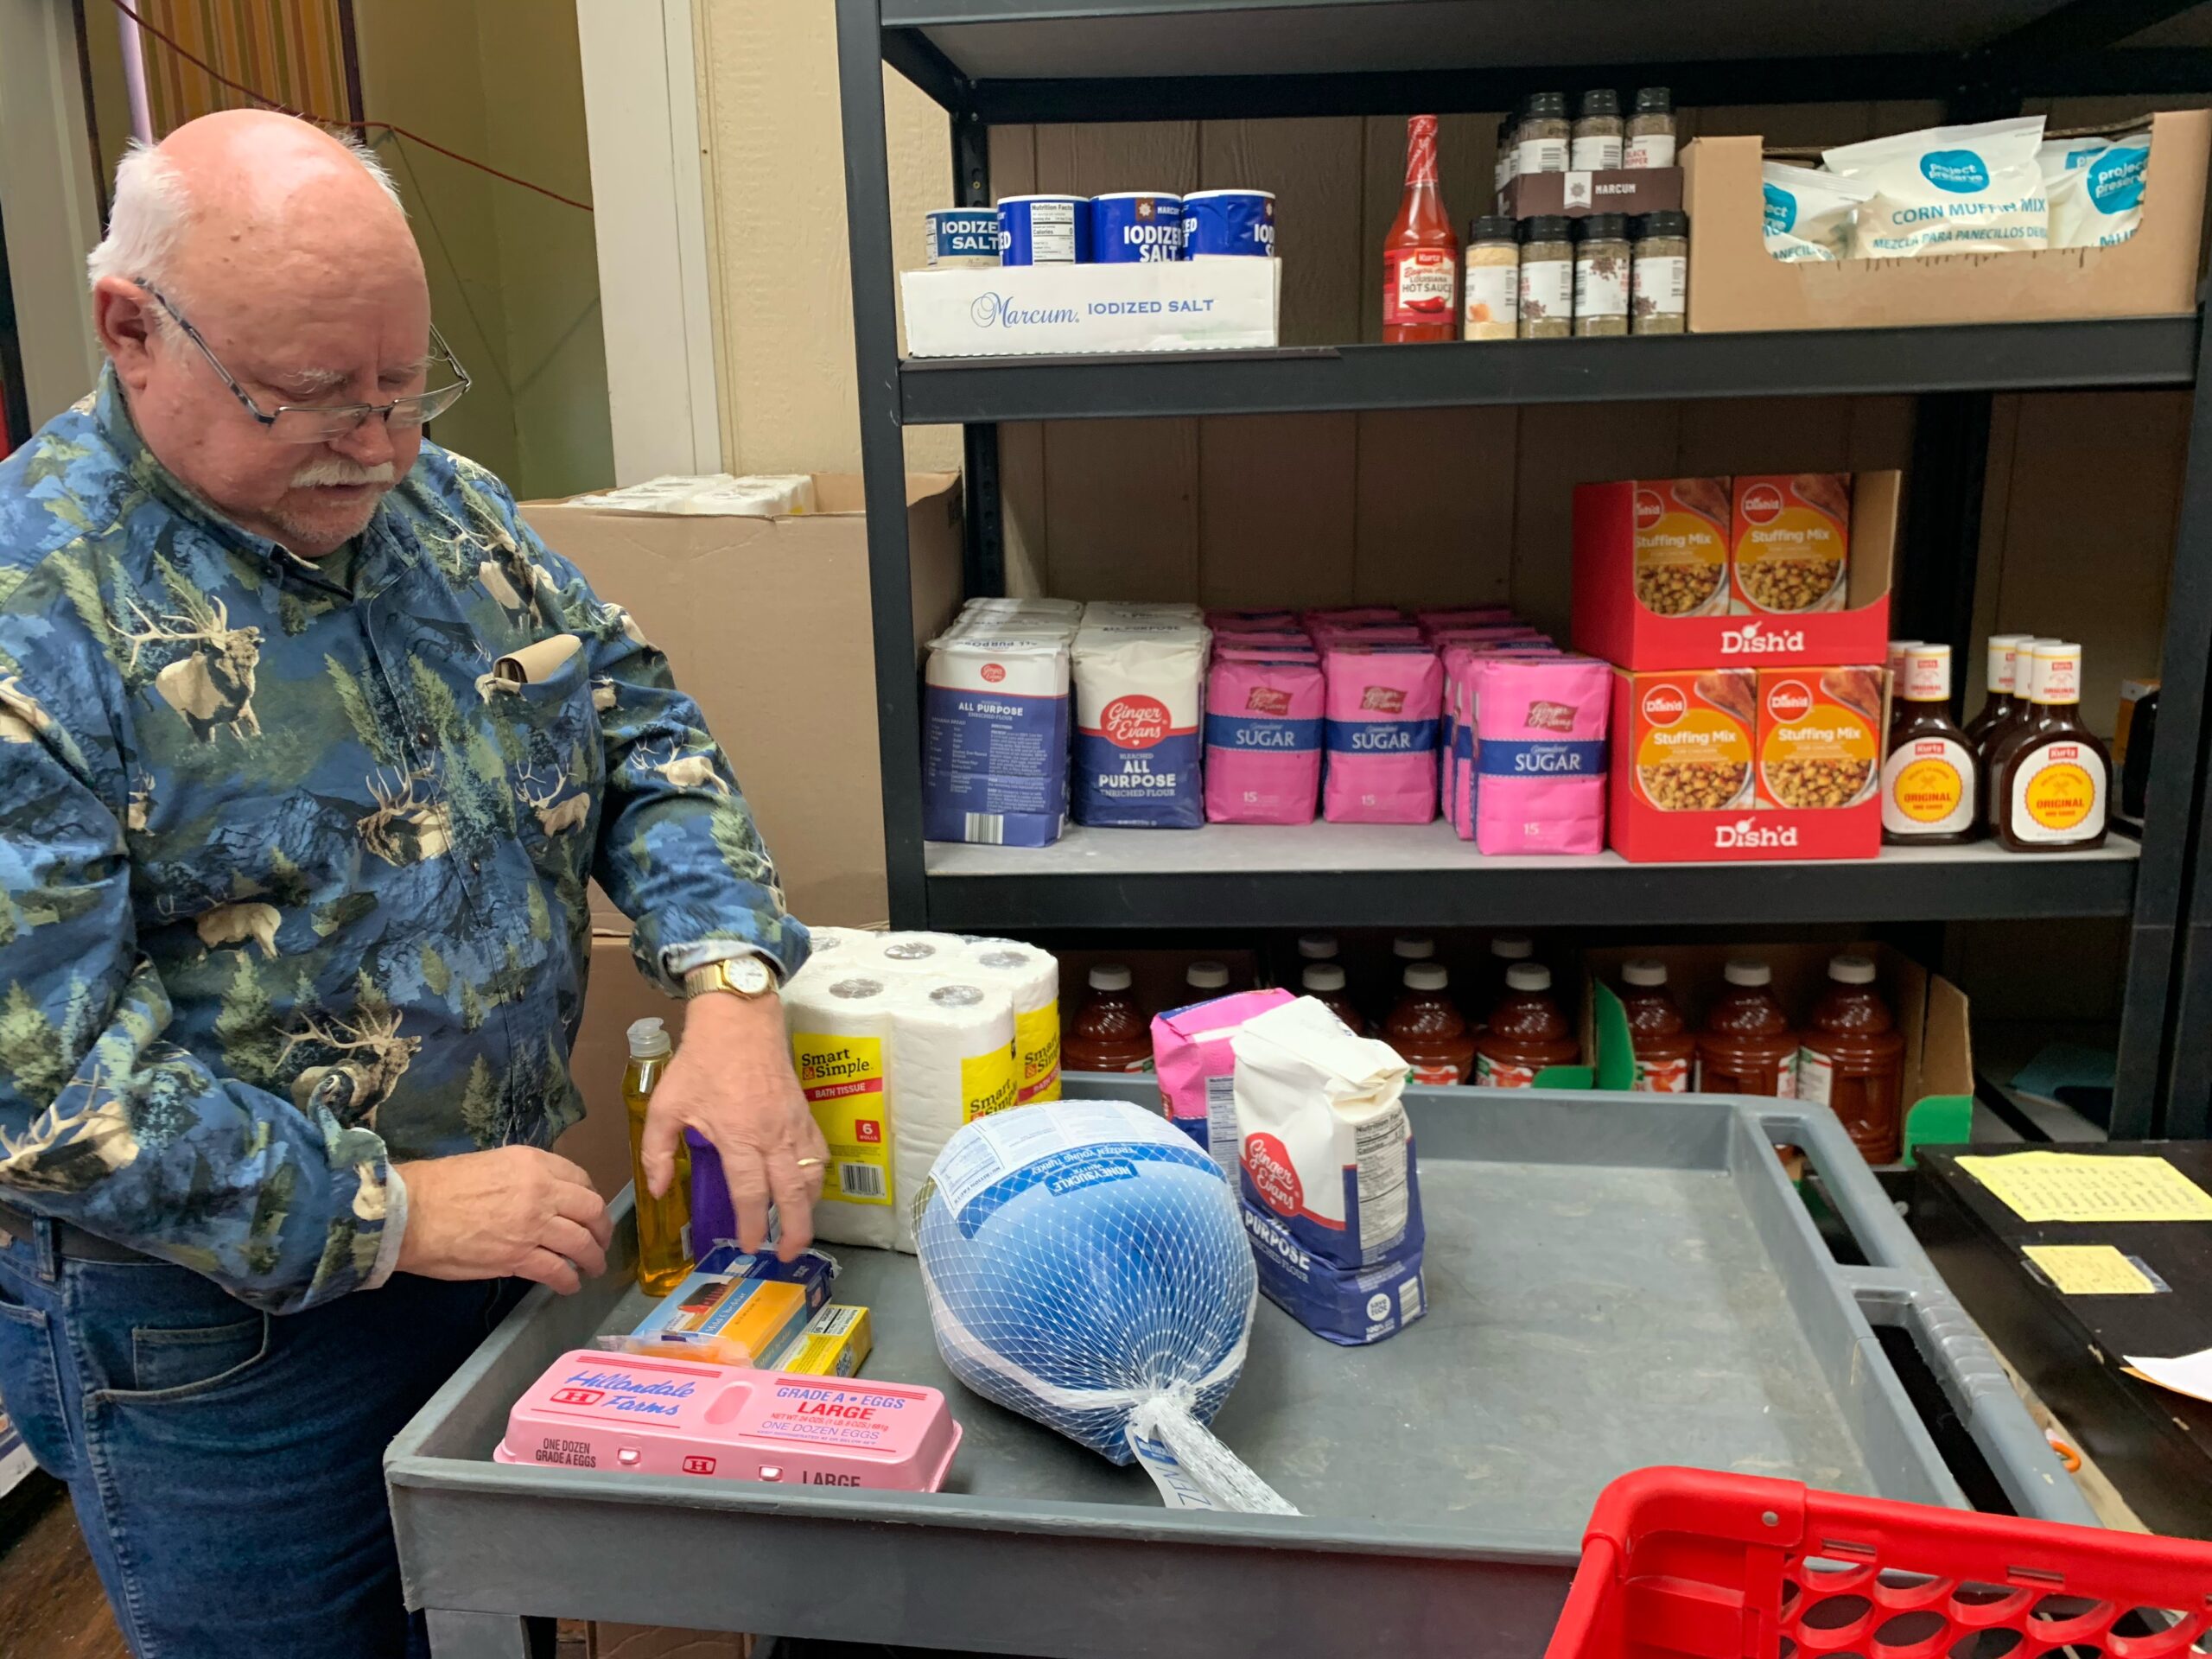 Director of the pantry, Tom Sollars, packages items for a local family. Sollars has been a volunteer at the pantry since it opened -- over 20 years.